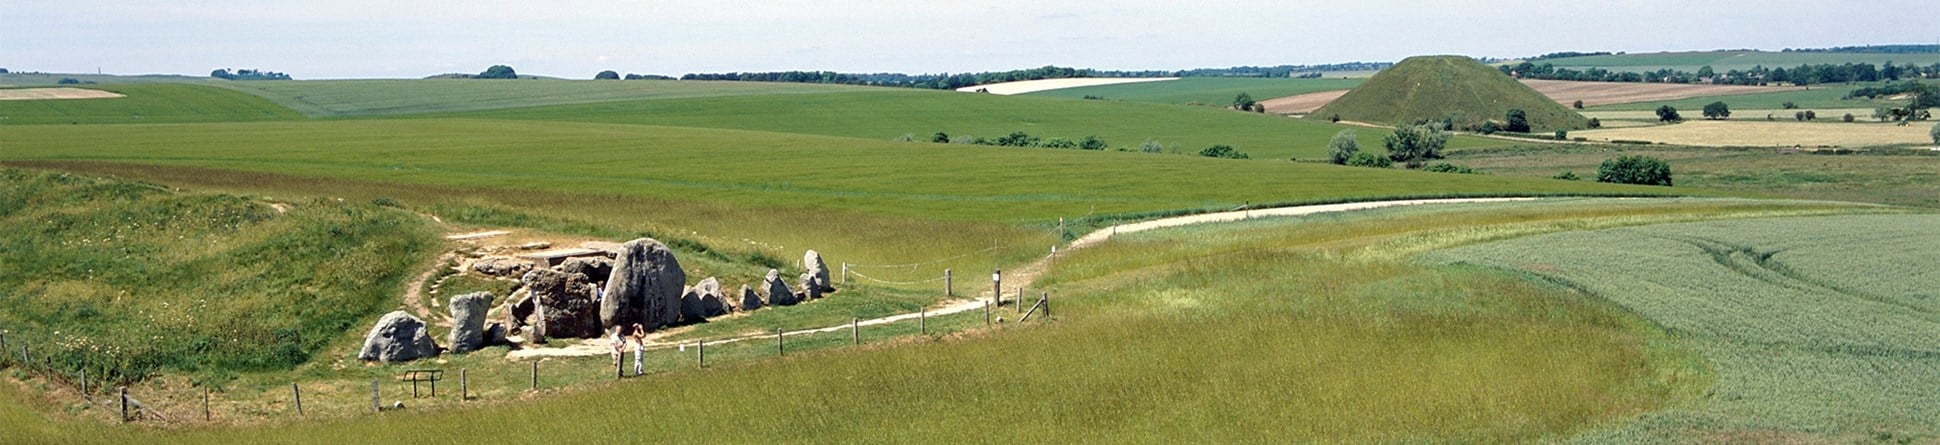 West Kennet long barrow and Silbury Hill, Wiltshire.